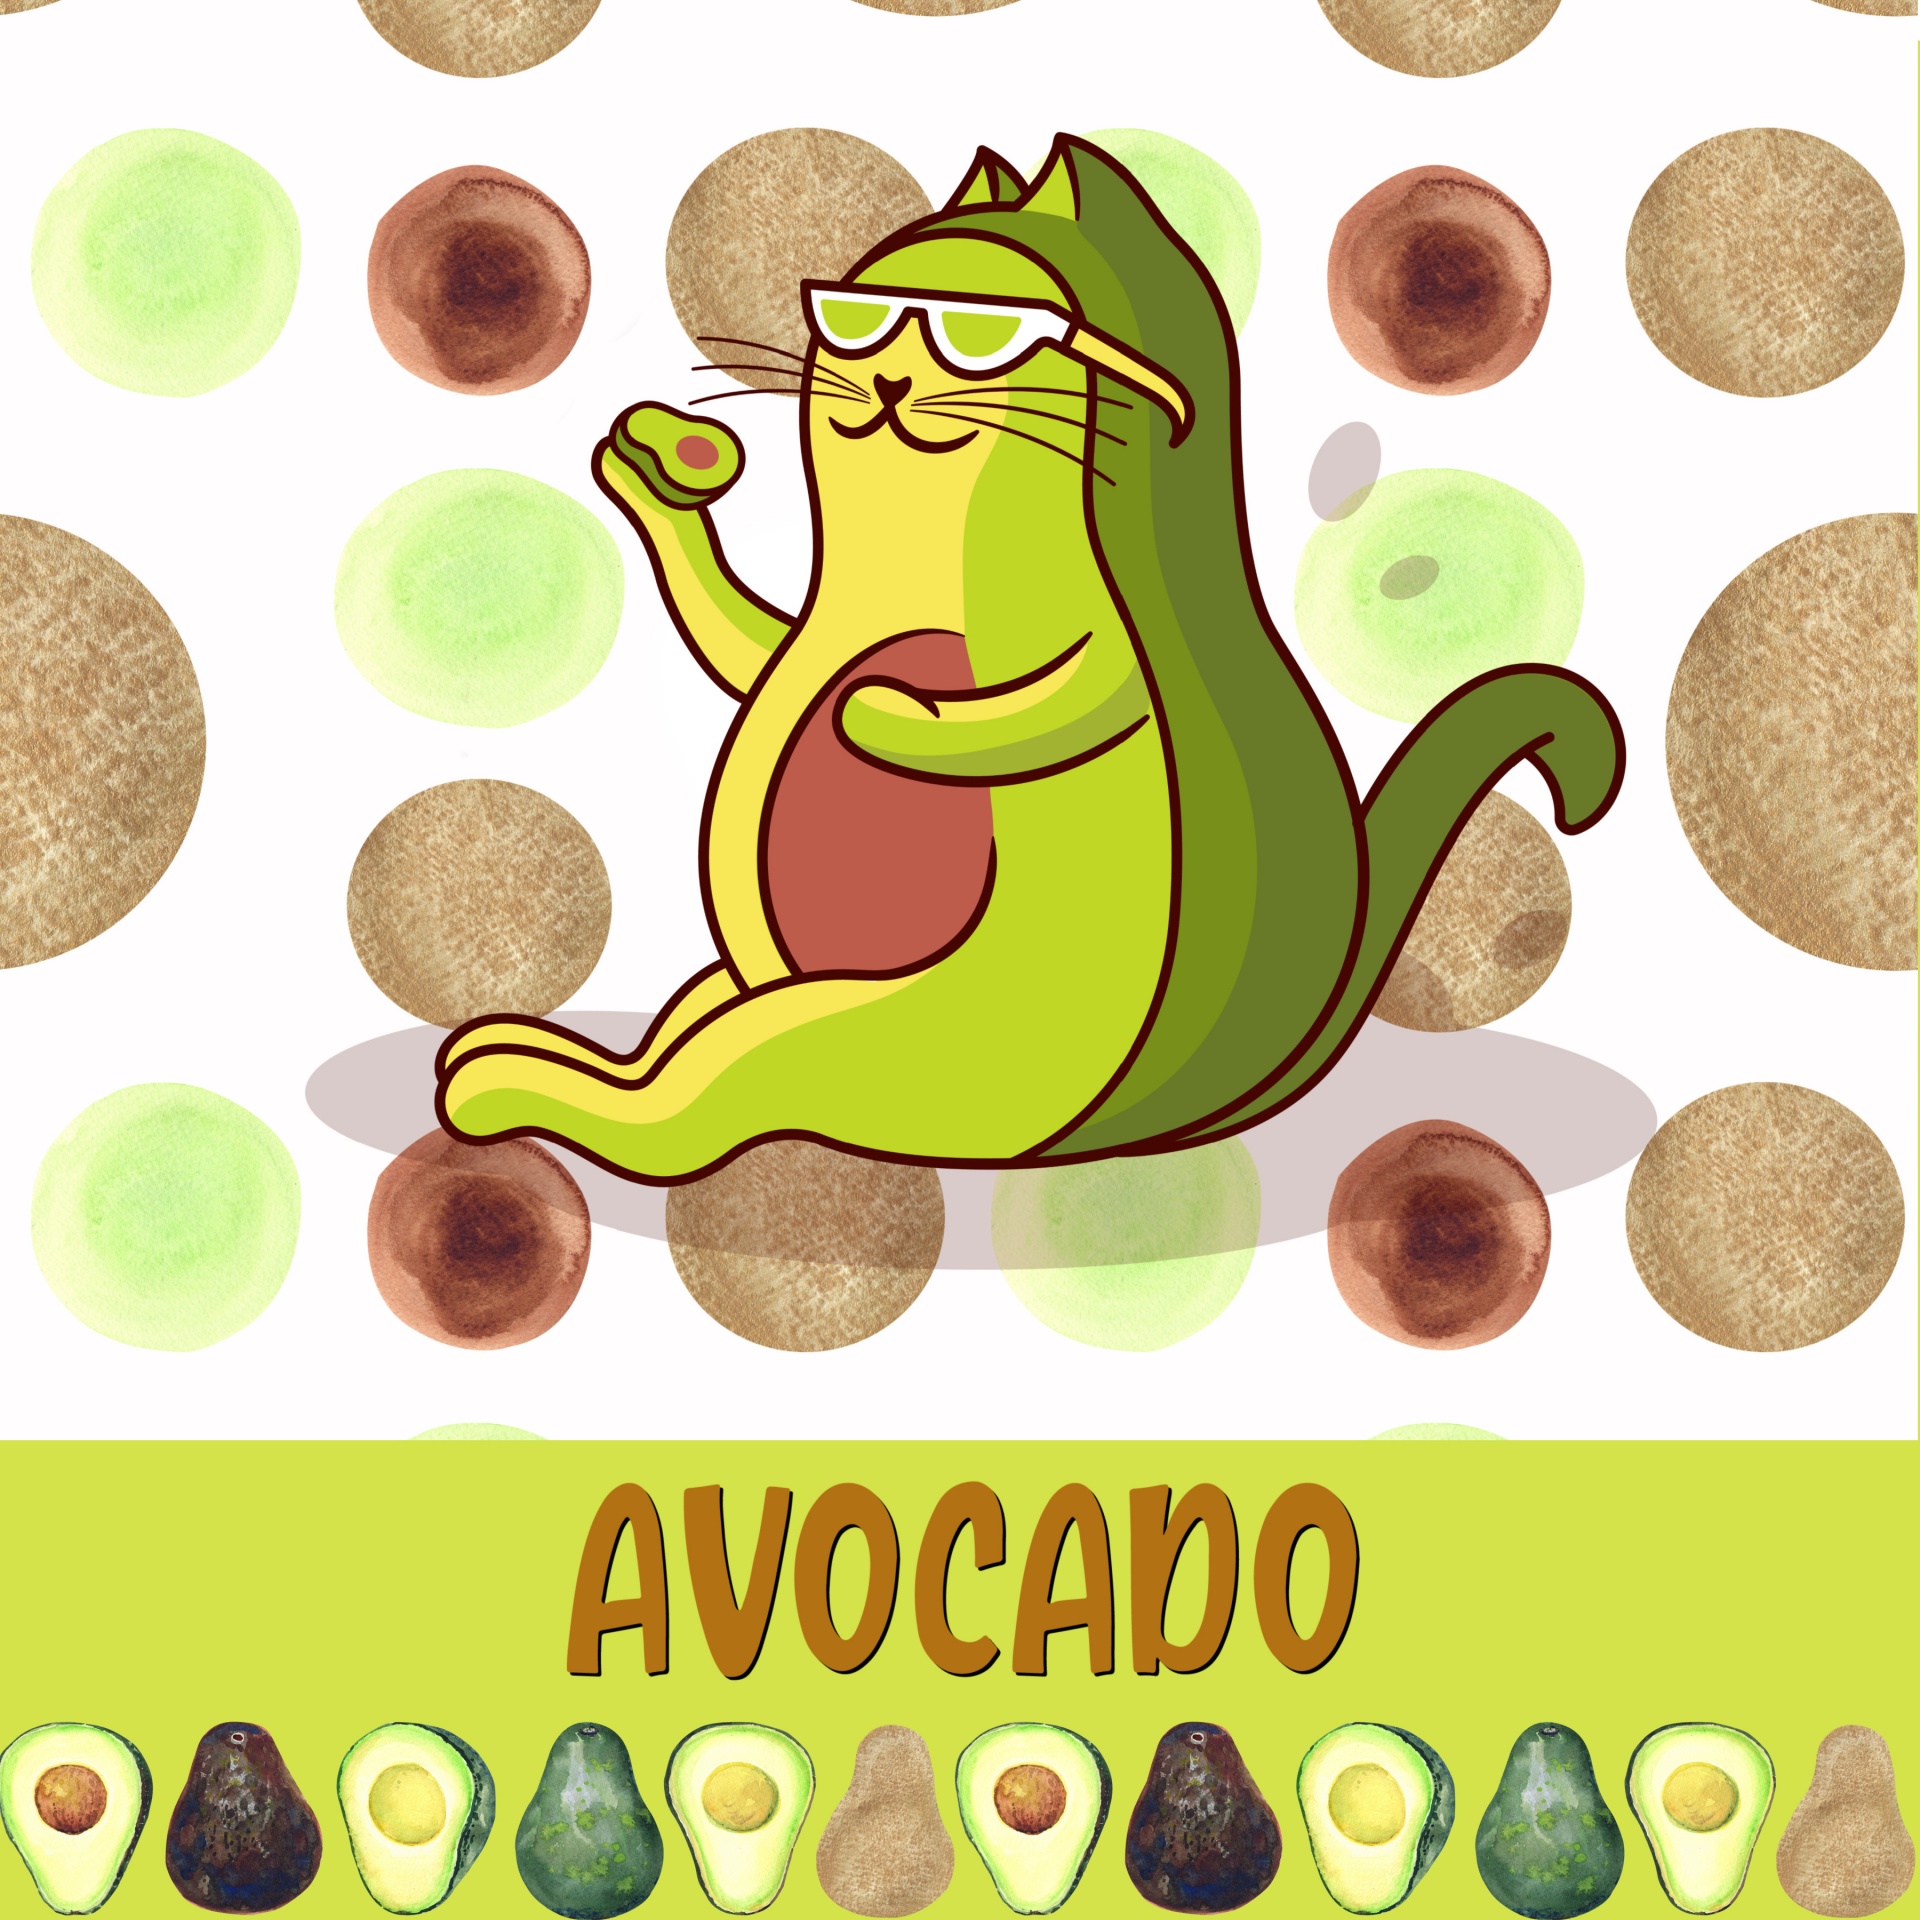 the word AVOCADO with a cute green avocado cat character on an avocado patterned background